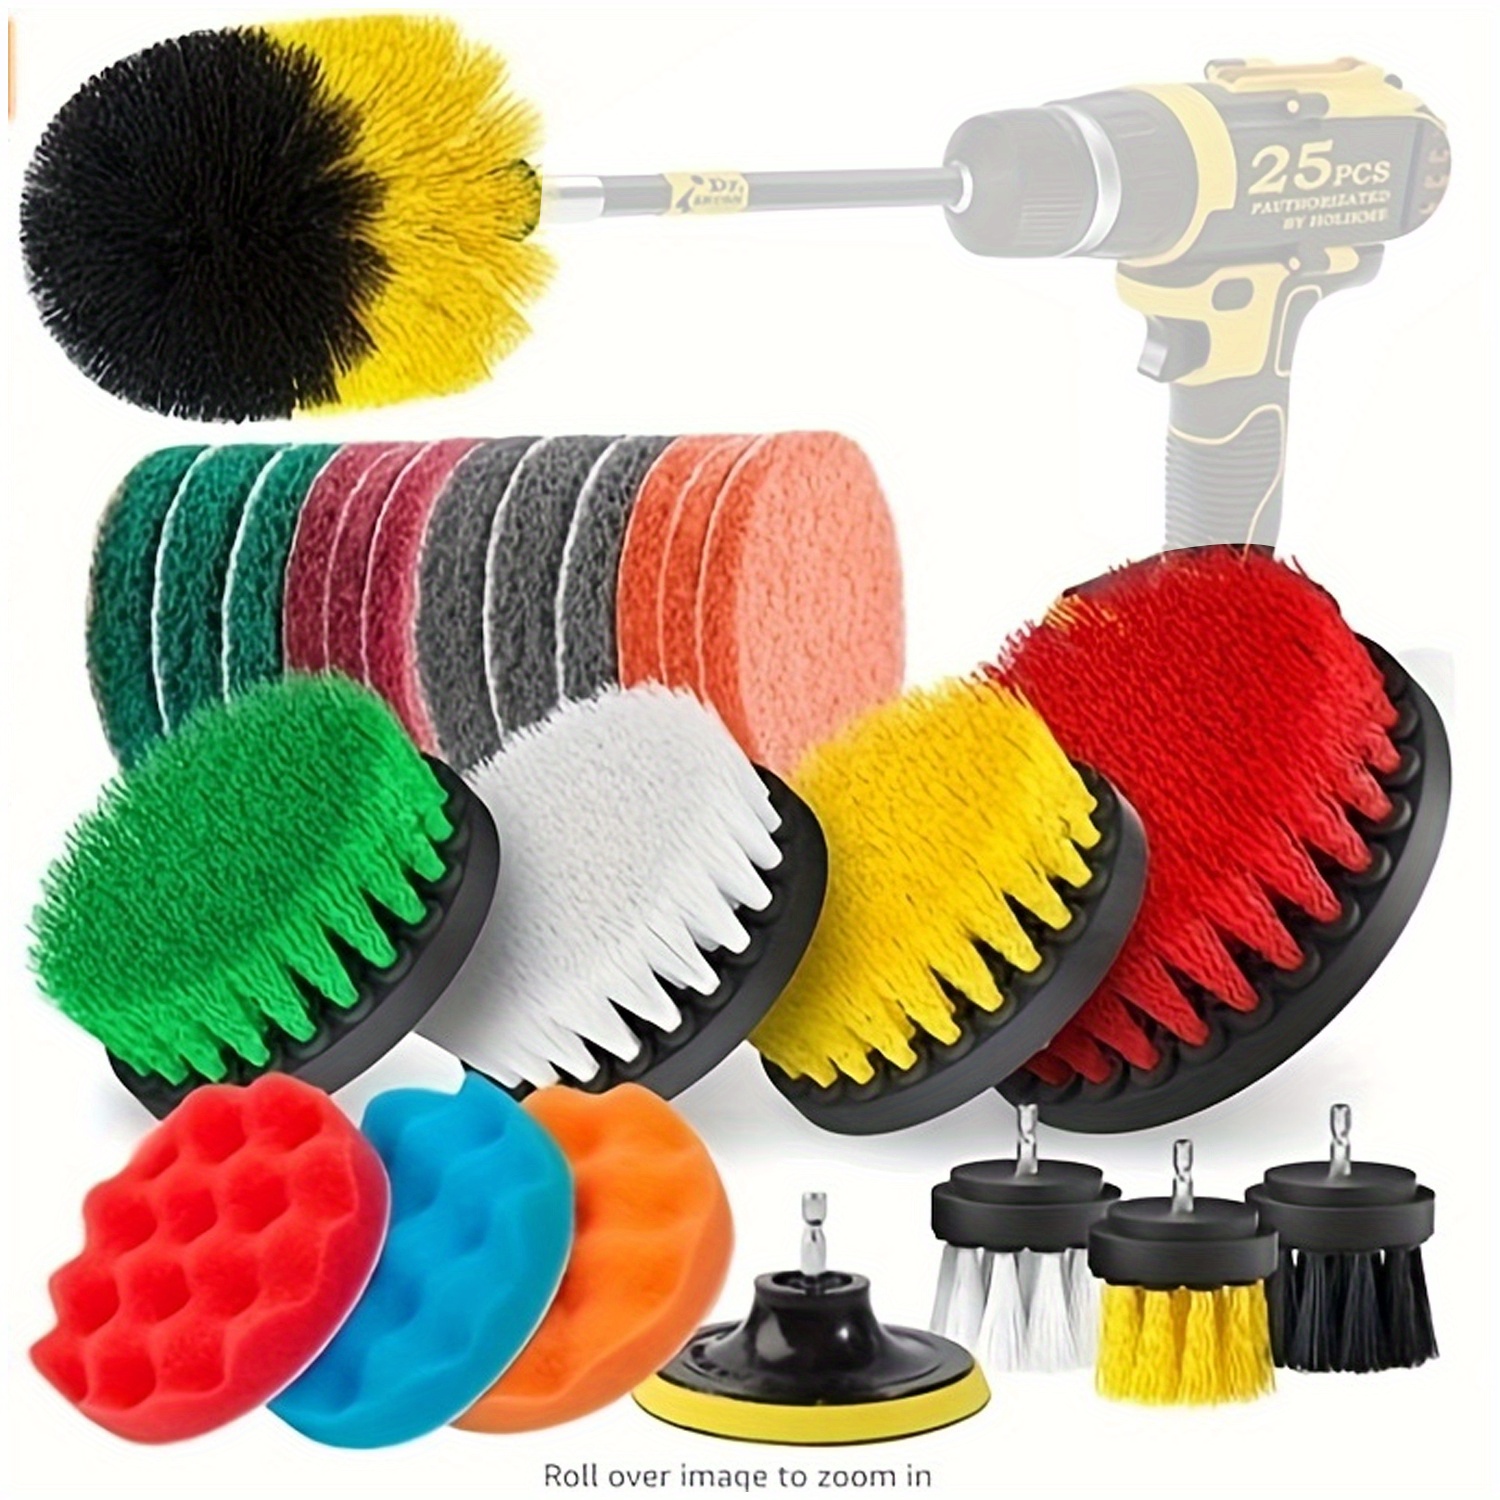 Automotive tiles cleaning brush car cleaning kit car washing systems